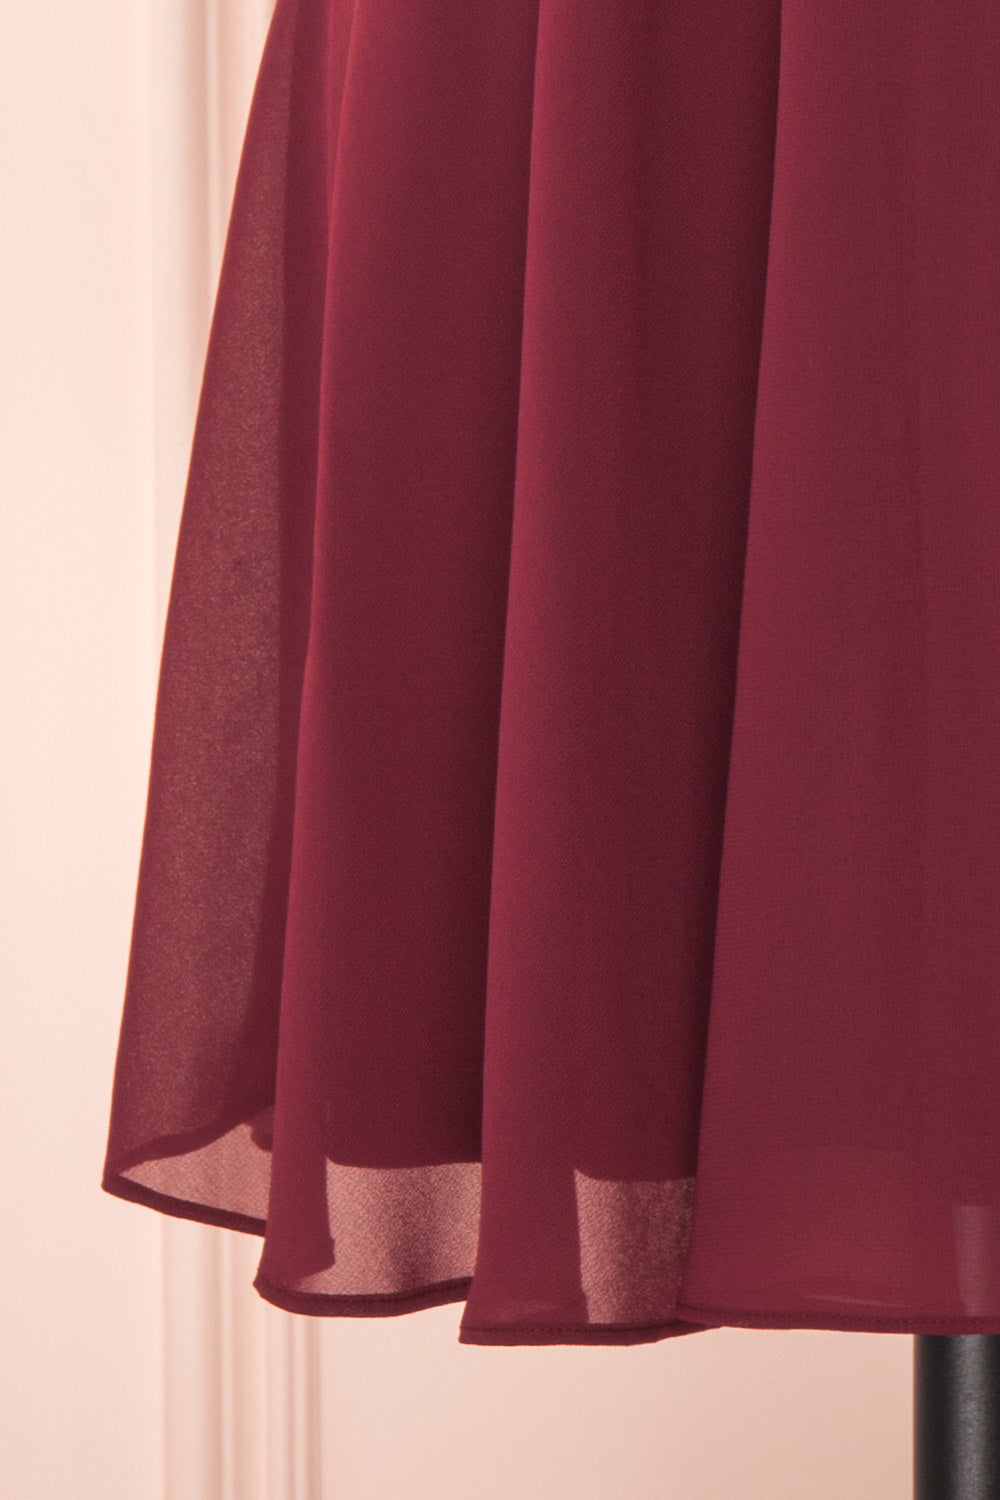 Irena Ruby Burgundy Short Dress w/ Embroidered Mesh | Boutique 1861 bottom close-up